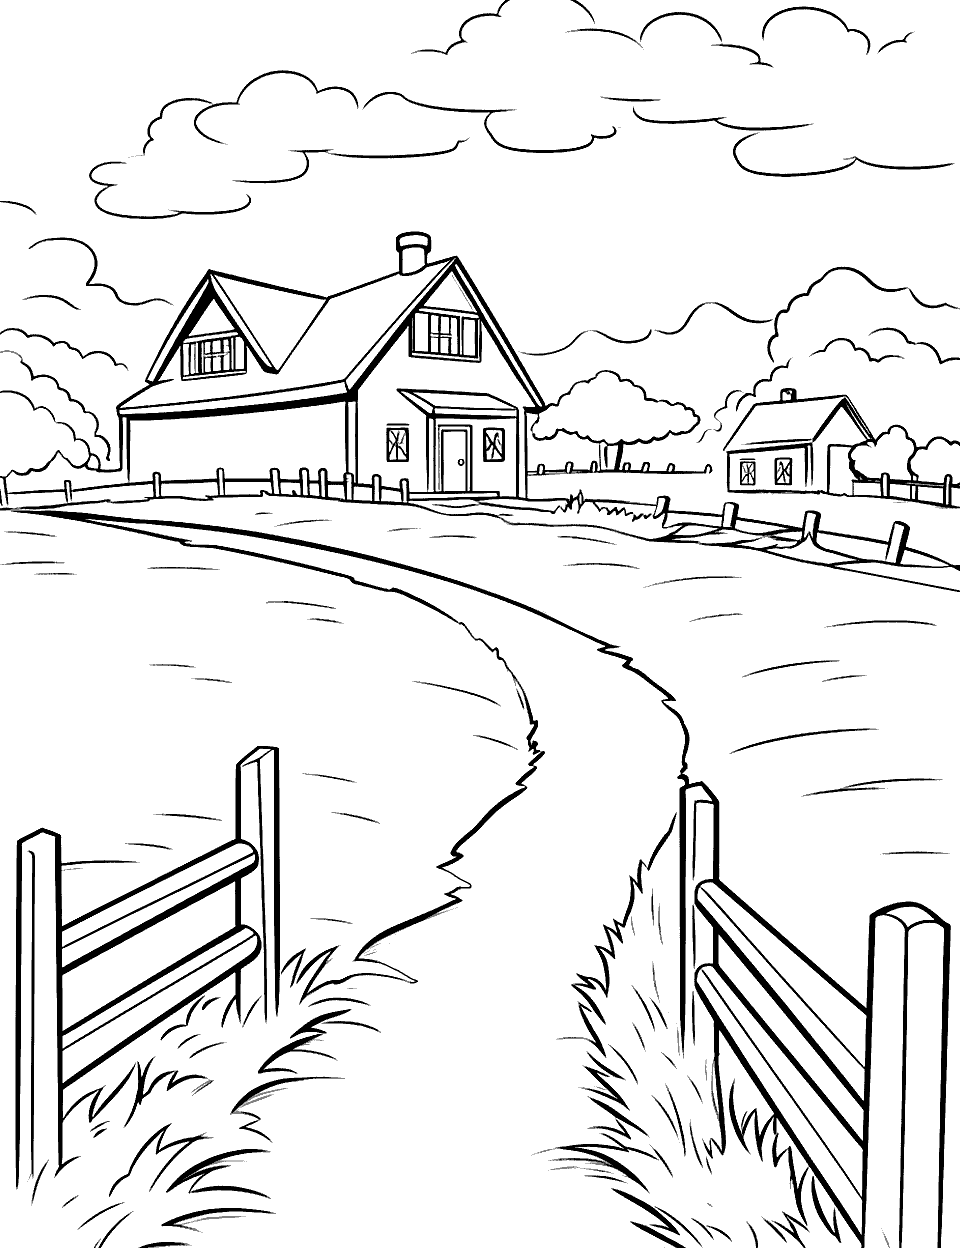 Country Road Leading to the Farm Coloring Page - A country road with fences on either side leading to the farm.